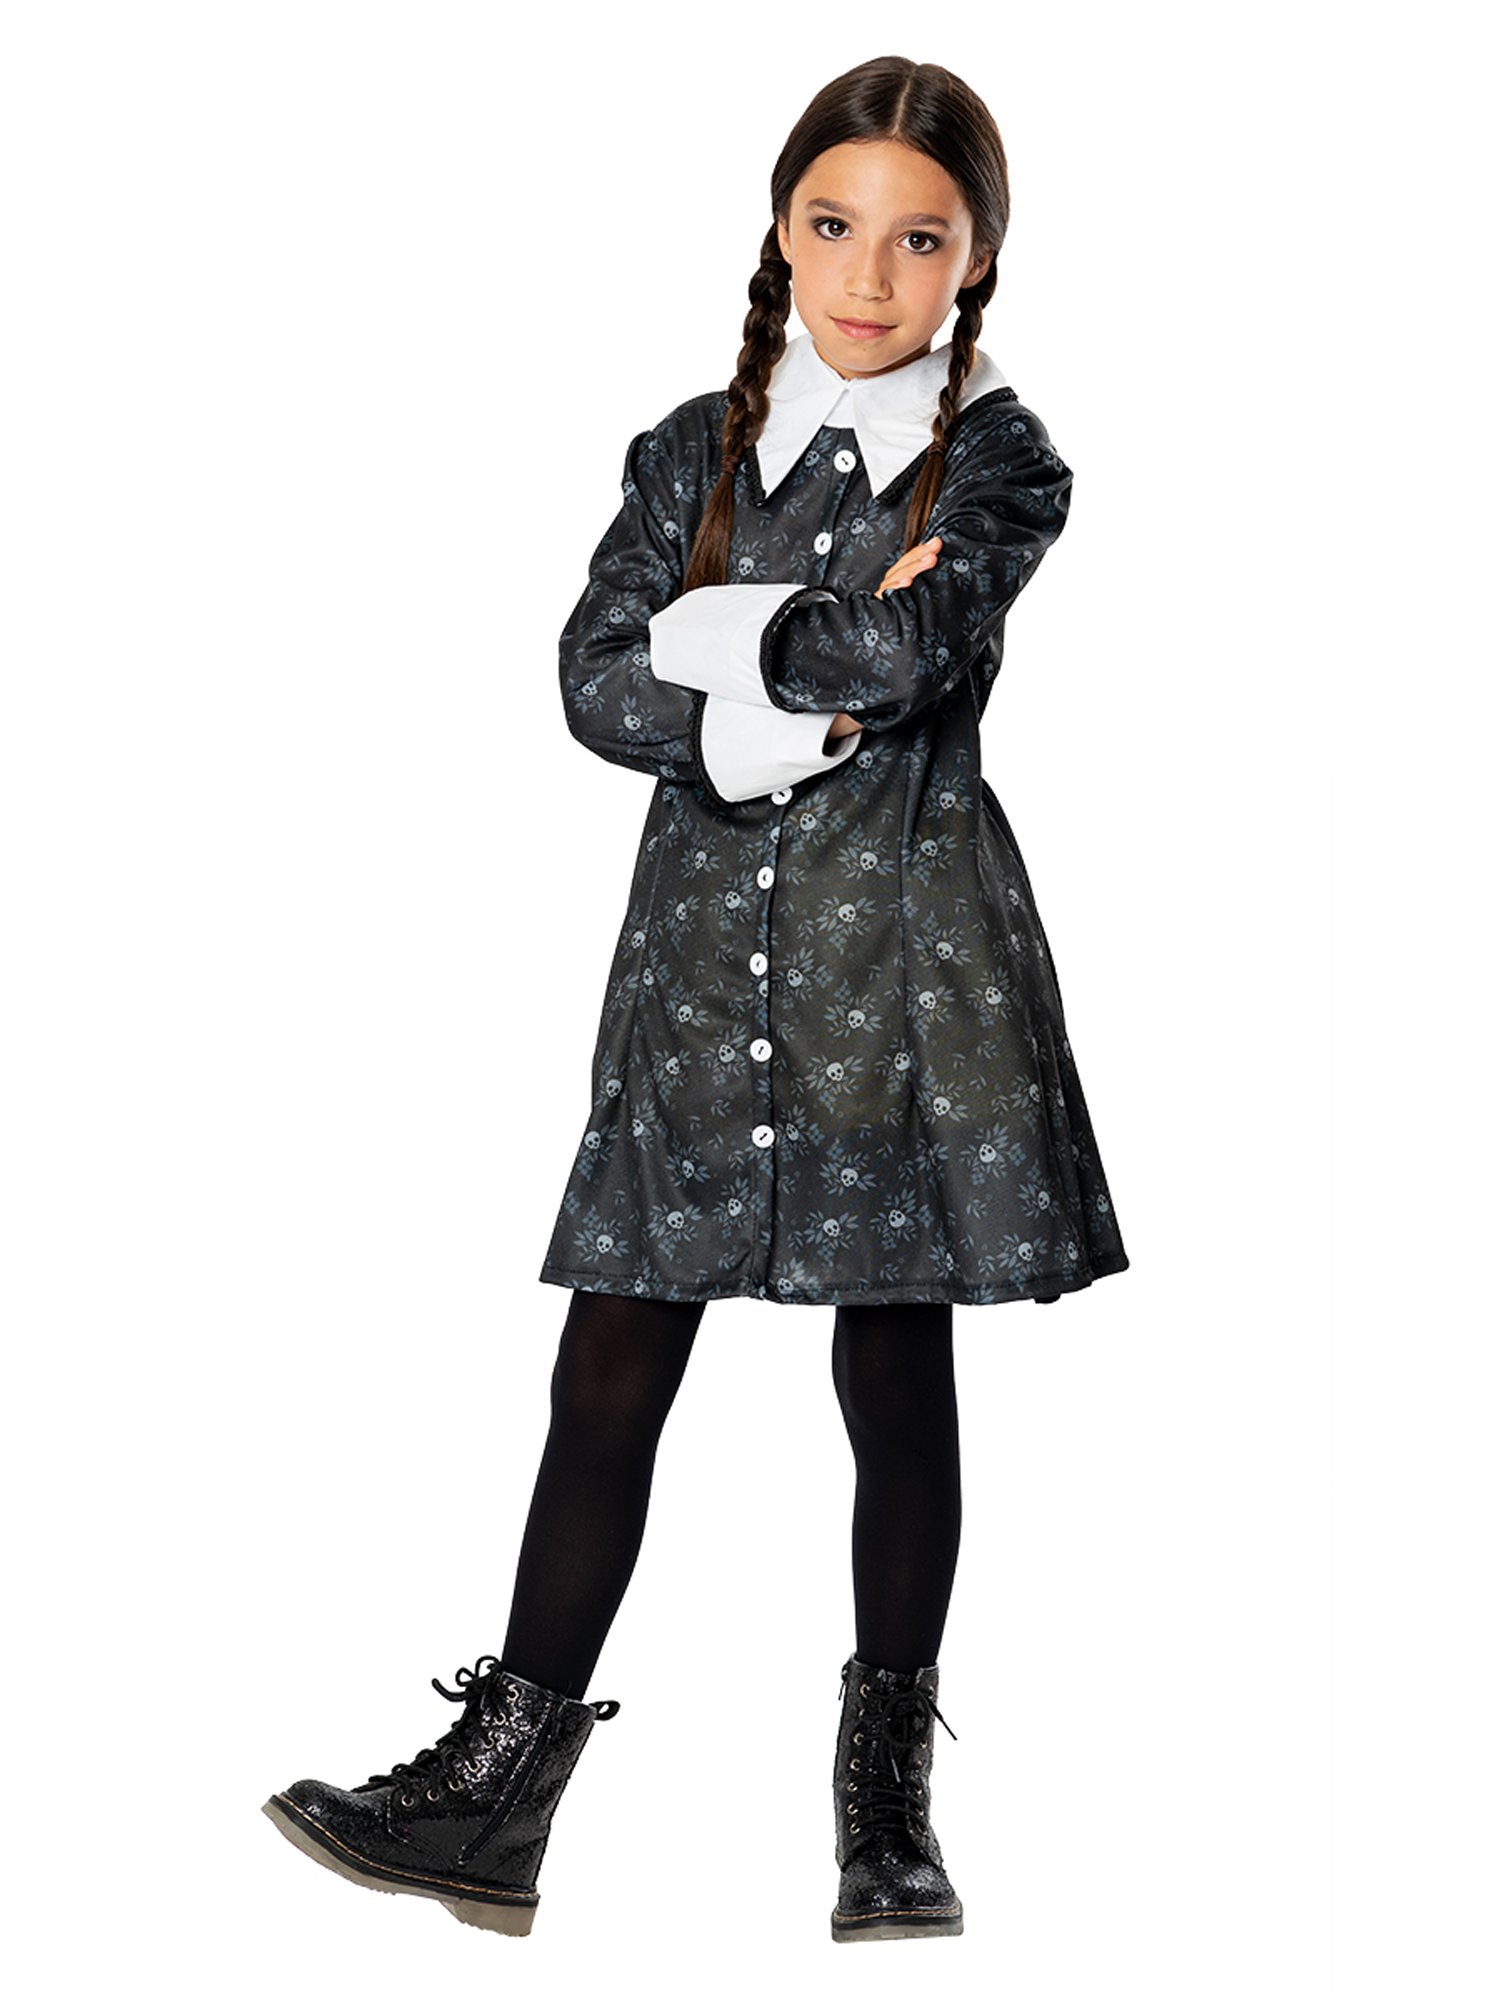 Wednesday Adams Gothic Teenager Full Body Black Outfit Dress